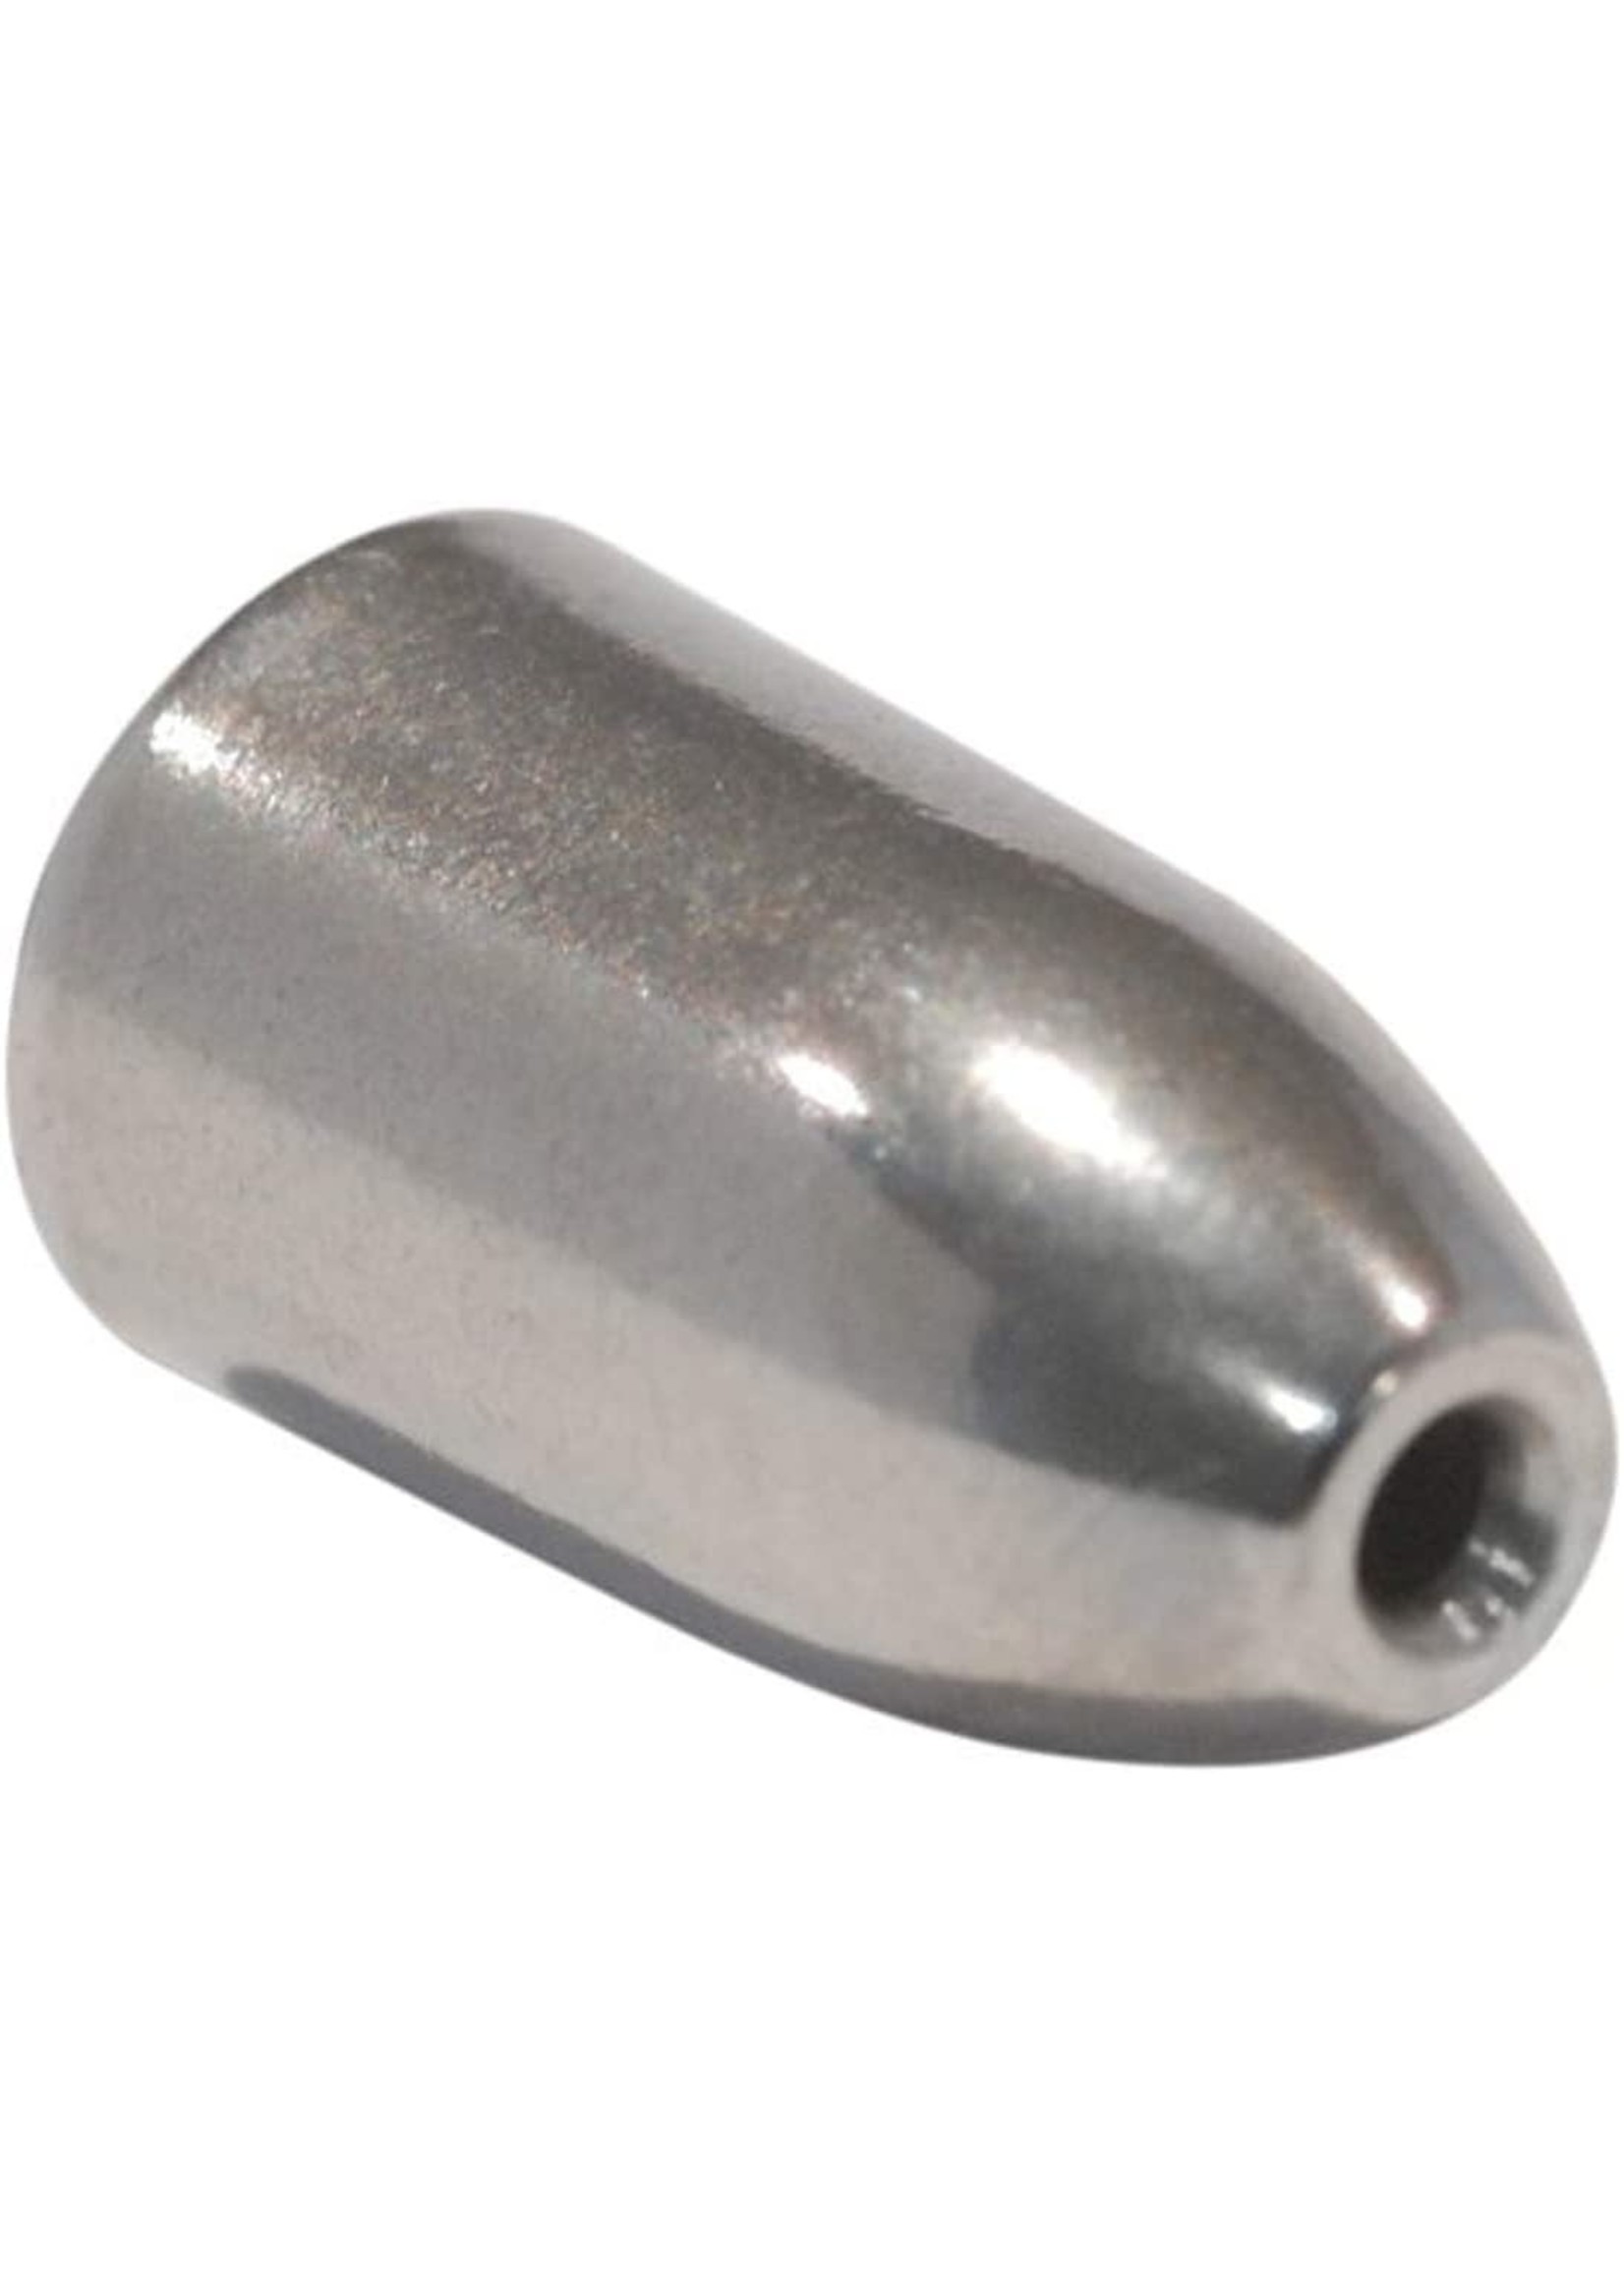 Bullet Weight Fishing Sinkers - Tungsten Bullet 1/2oz - Brothers